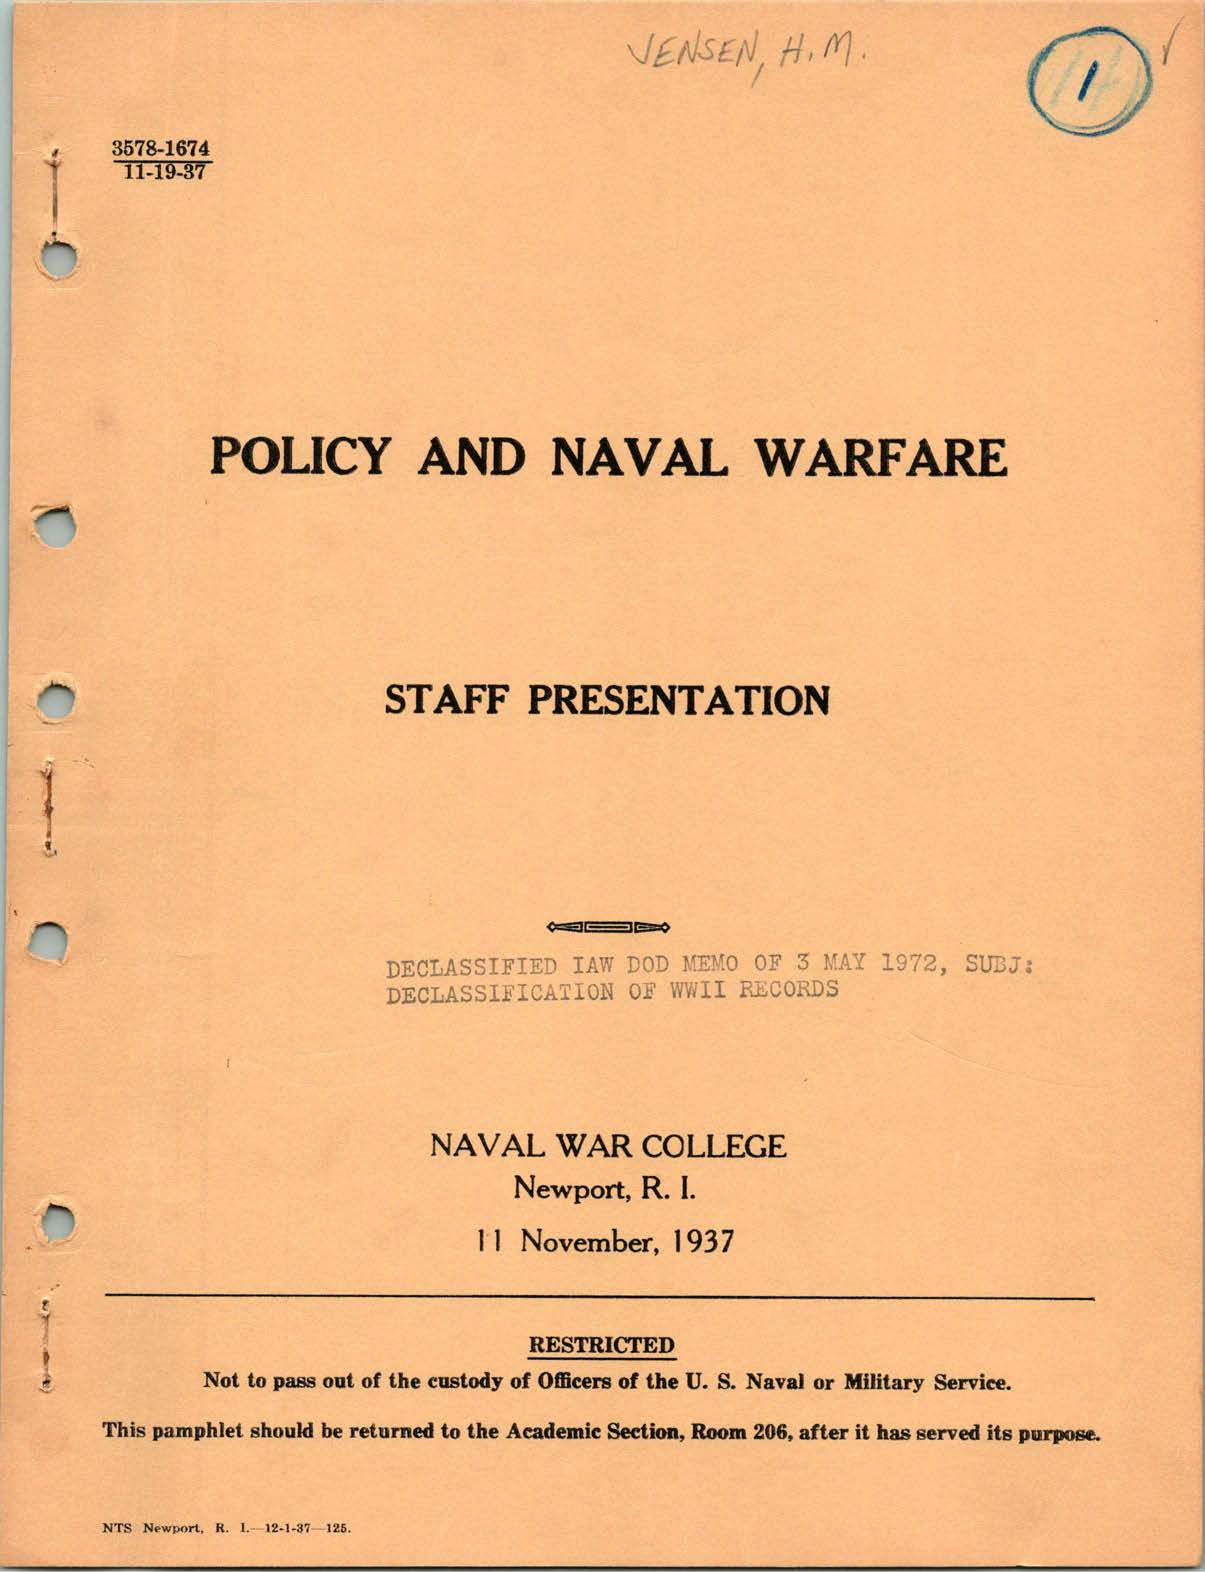 Policy and Naval Warfare, by Henry M. Jensen